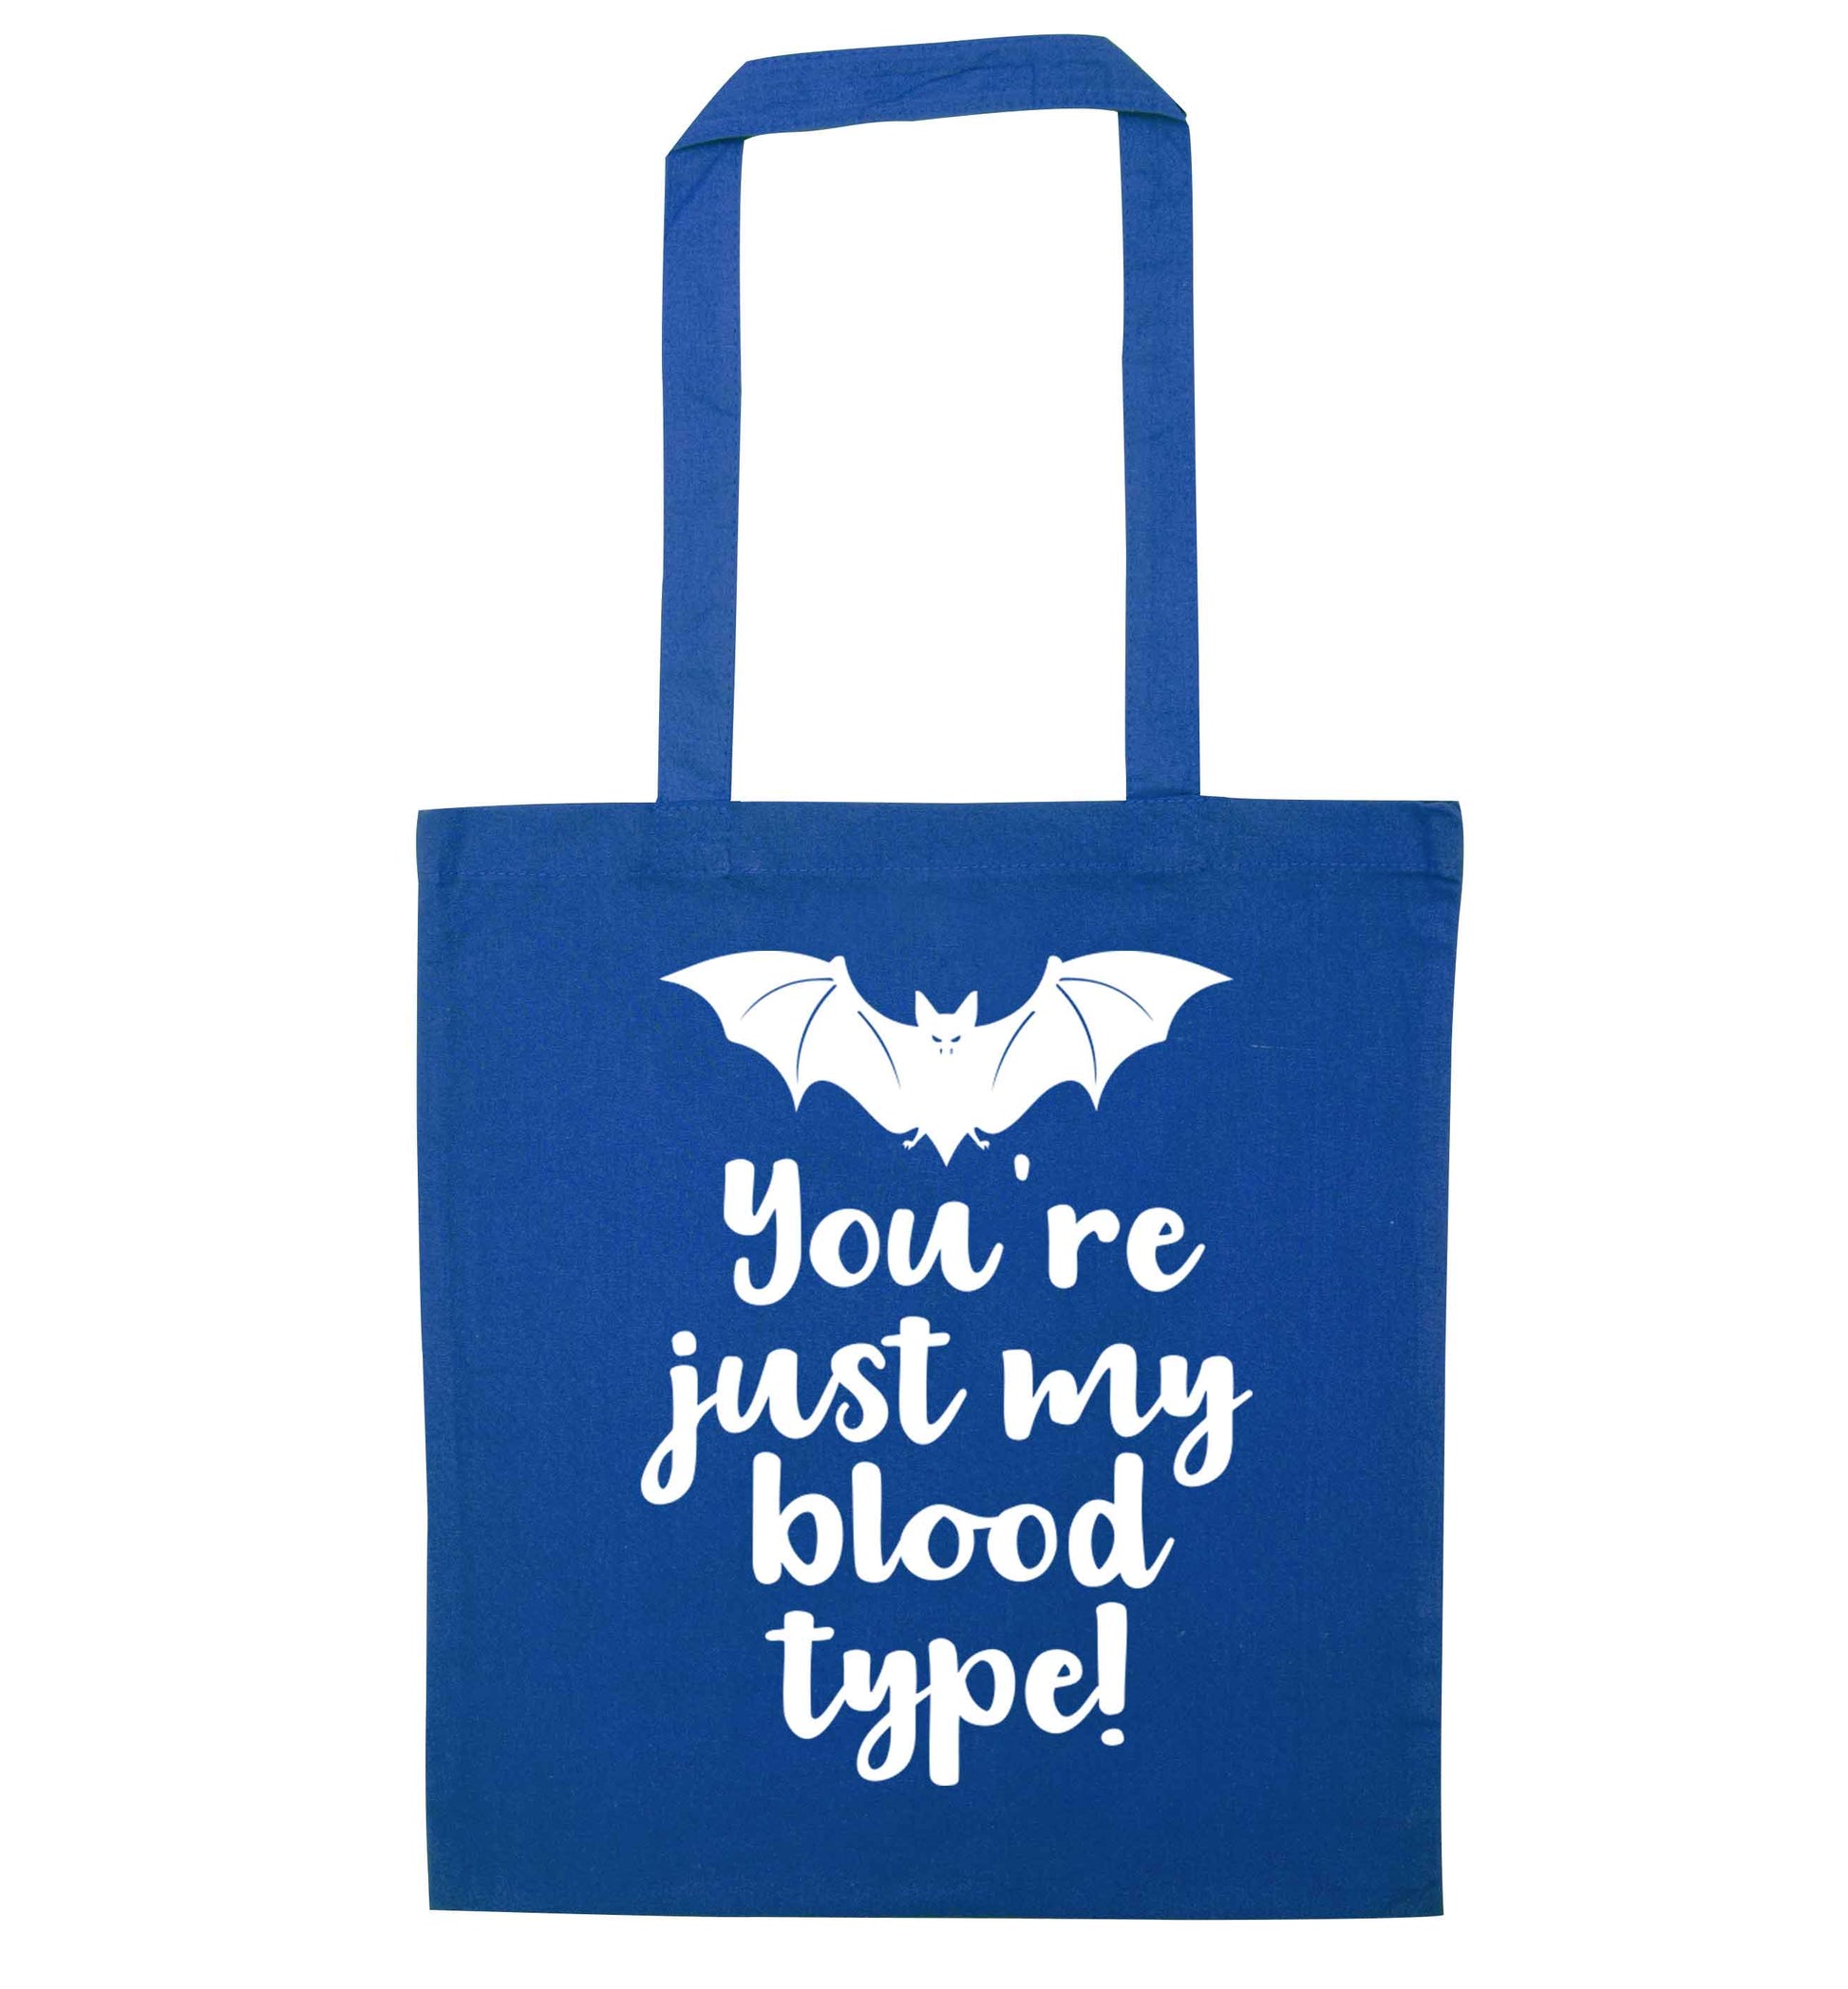 You're just my blood type blue tote bag